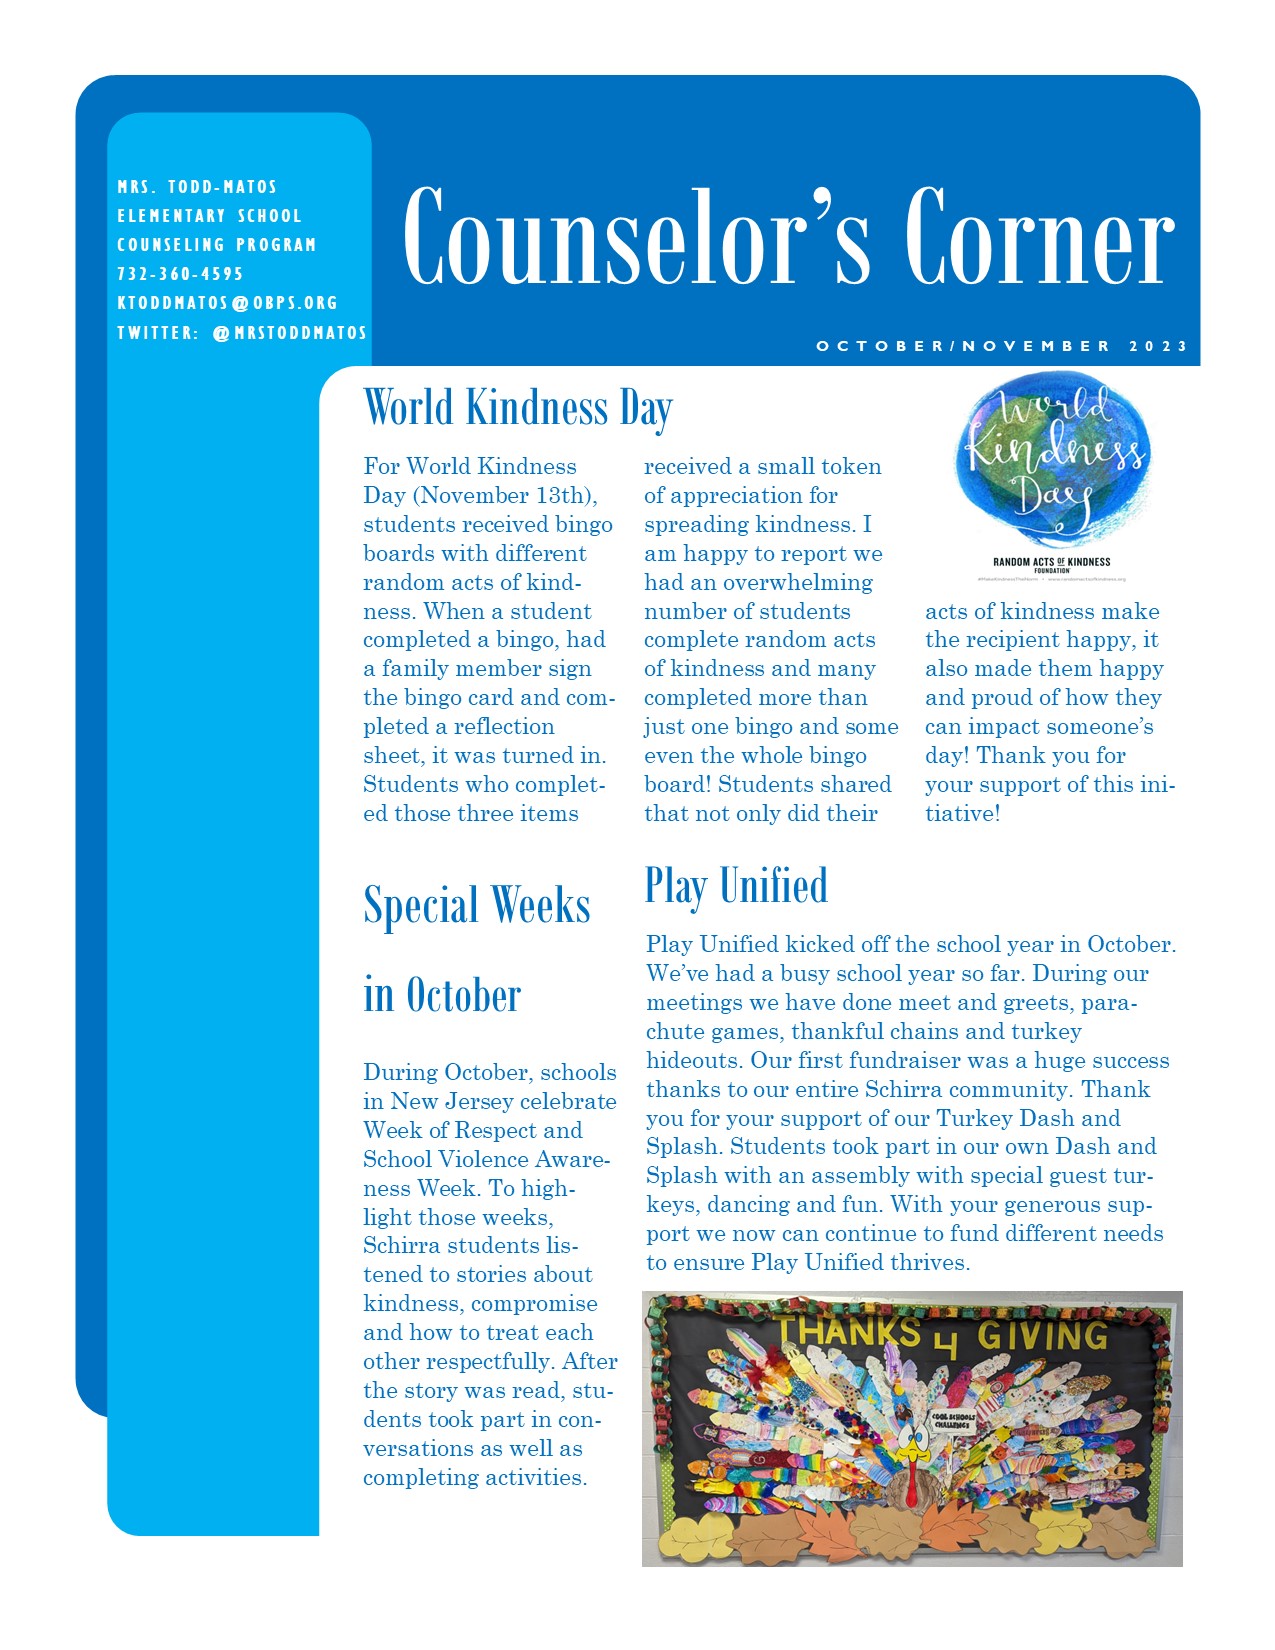 School Counselor October/November Newsletter Page 1